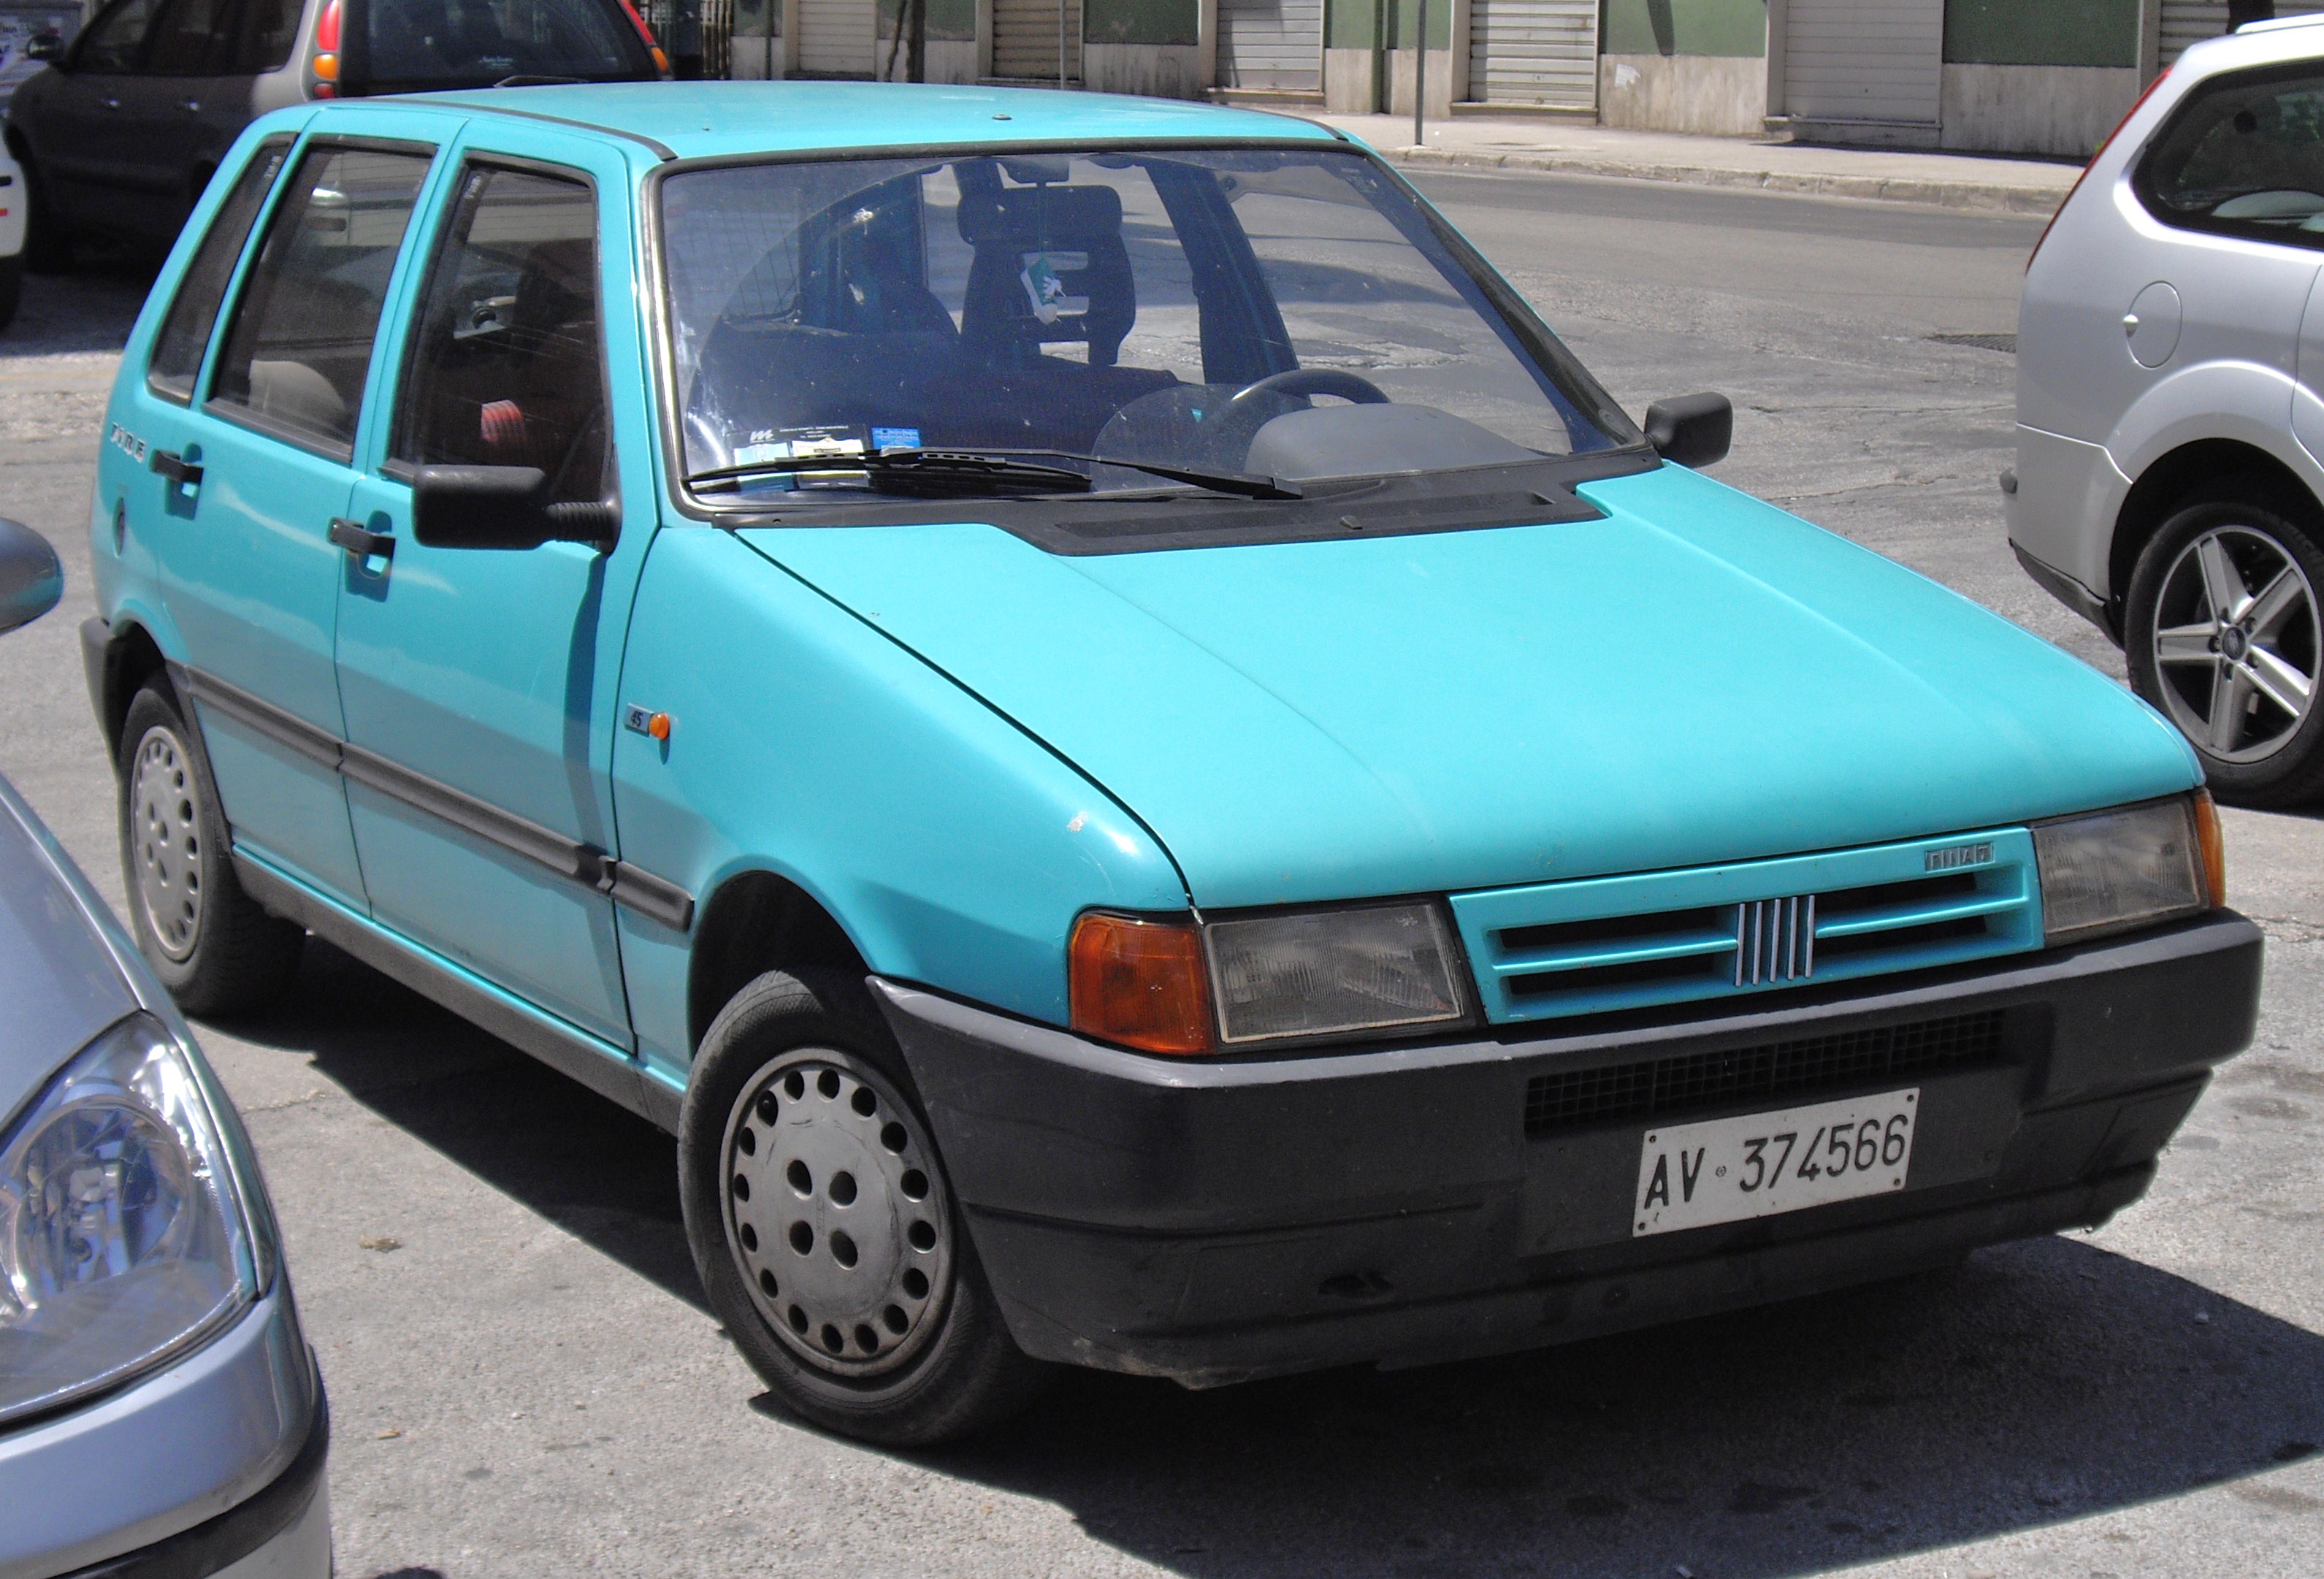 Fiat Uno technical details, history, photos on Better